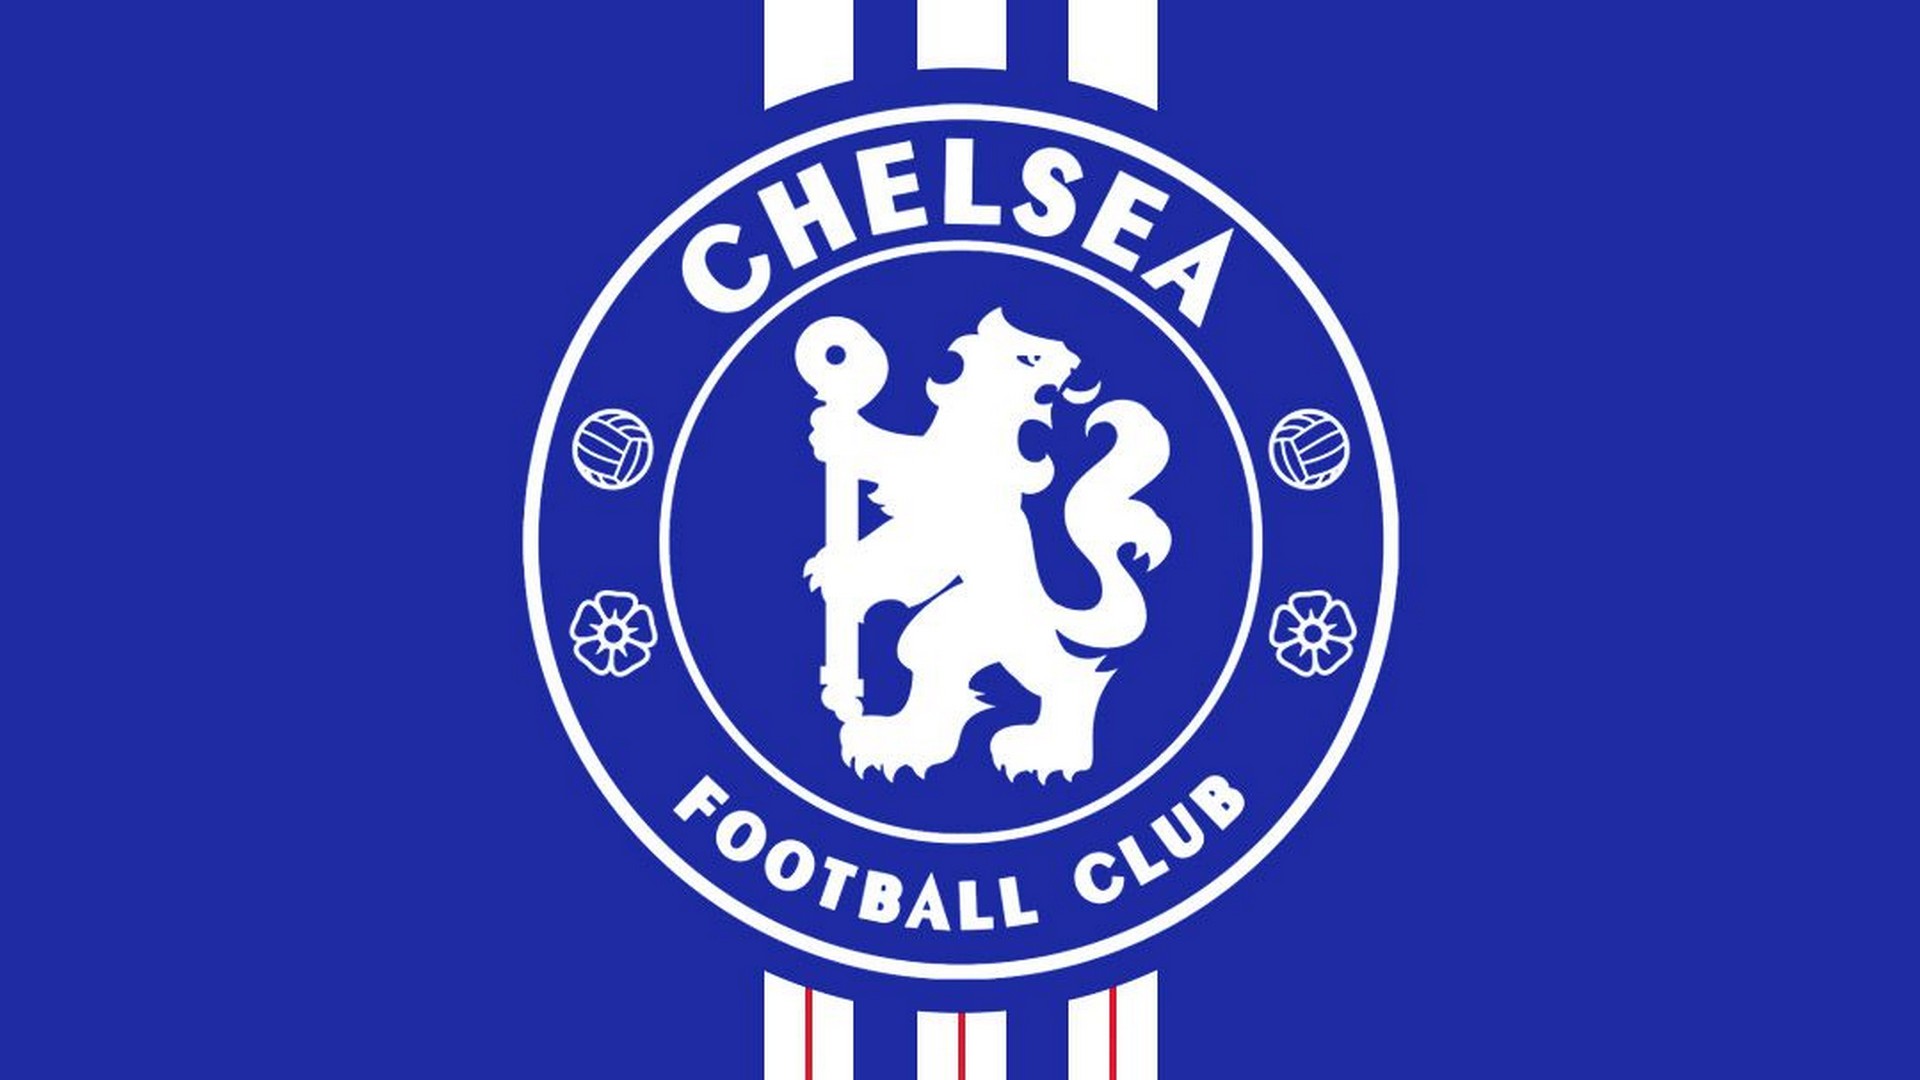 HD Chelsea Logo Backgrounds With high-resolution 1920X1080 pixel. You can use this wallpaper for your Desktop Computers, Mac Screensavers, Windows Backgrounds, iPhone Wallpapers, Tablet or Android Lock screen and another Mobile device